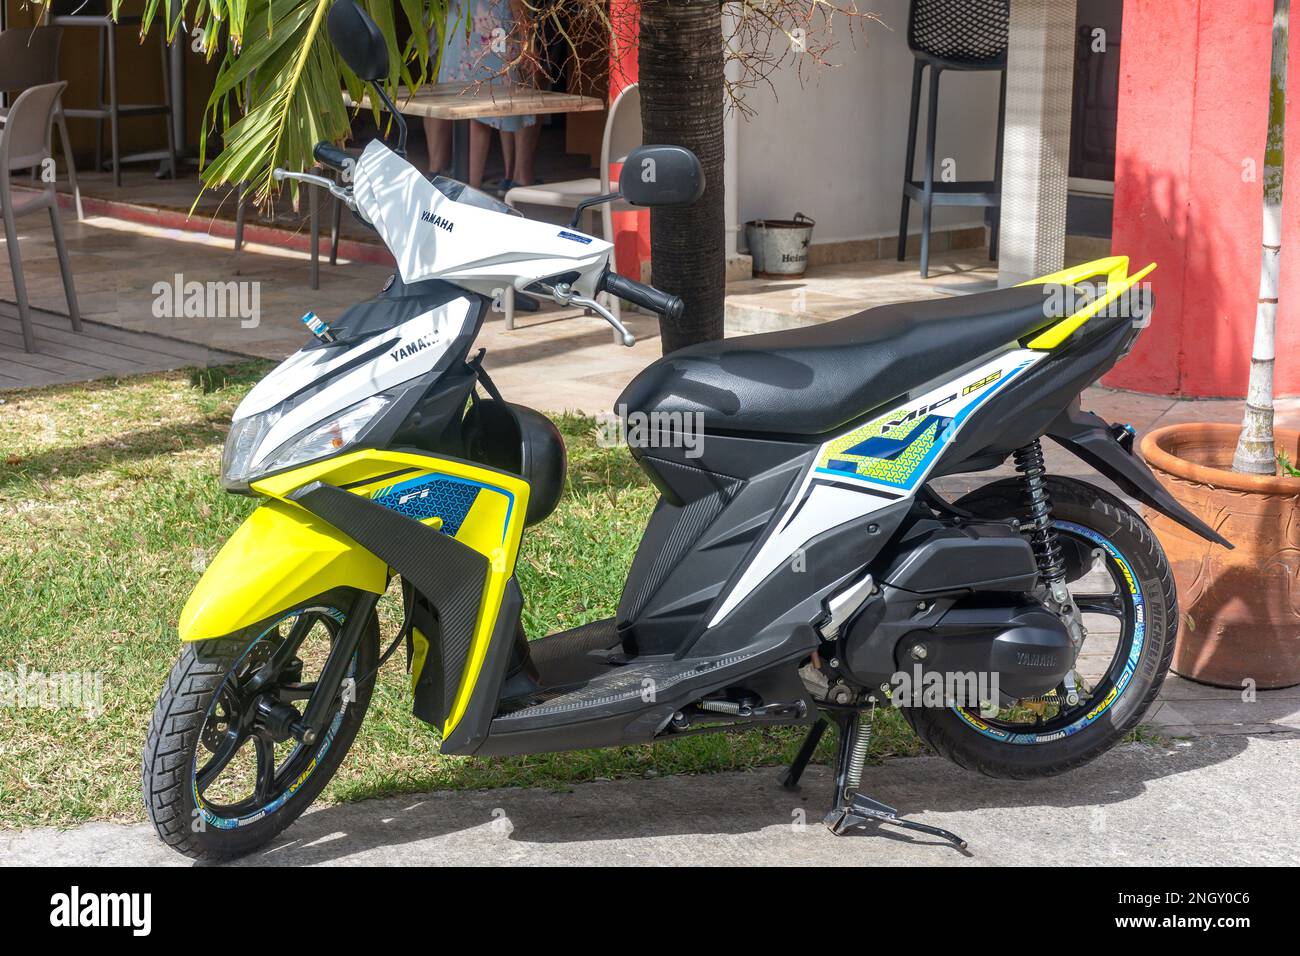 Yamaha MIO i 125 moped scooter parked, Orient Bay (Baie Orientale), St Martin (Saint-Martin), Lesser Antilles, Caribbean Stock Photo